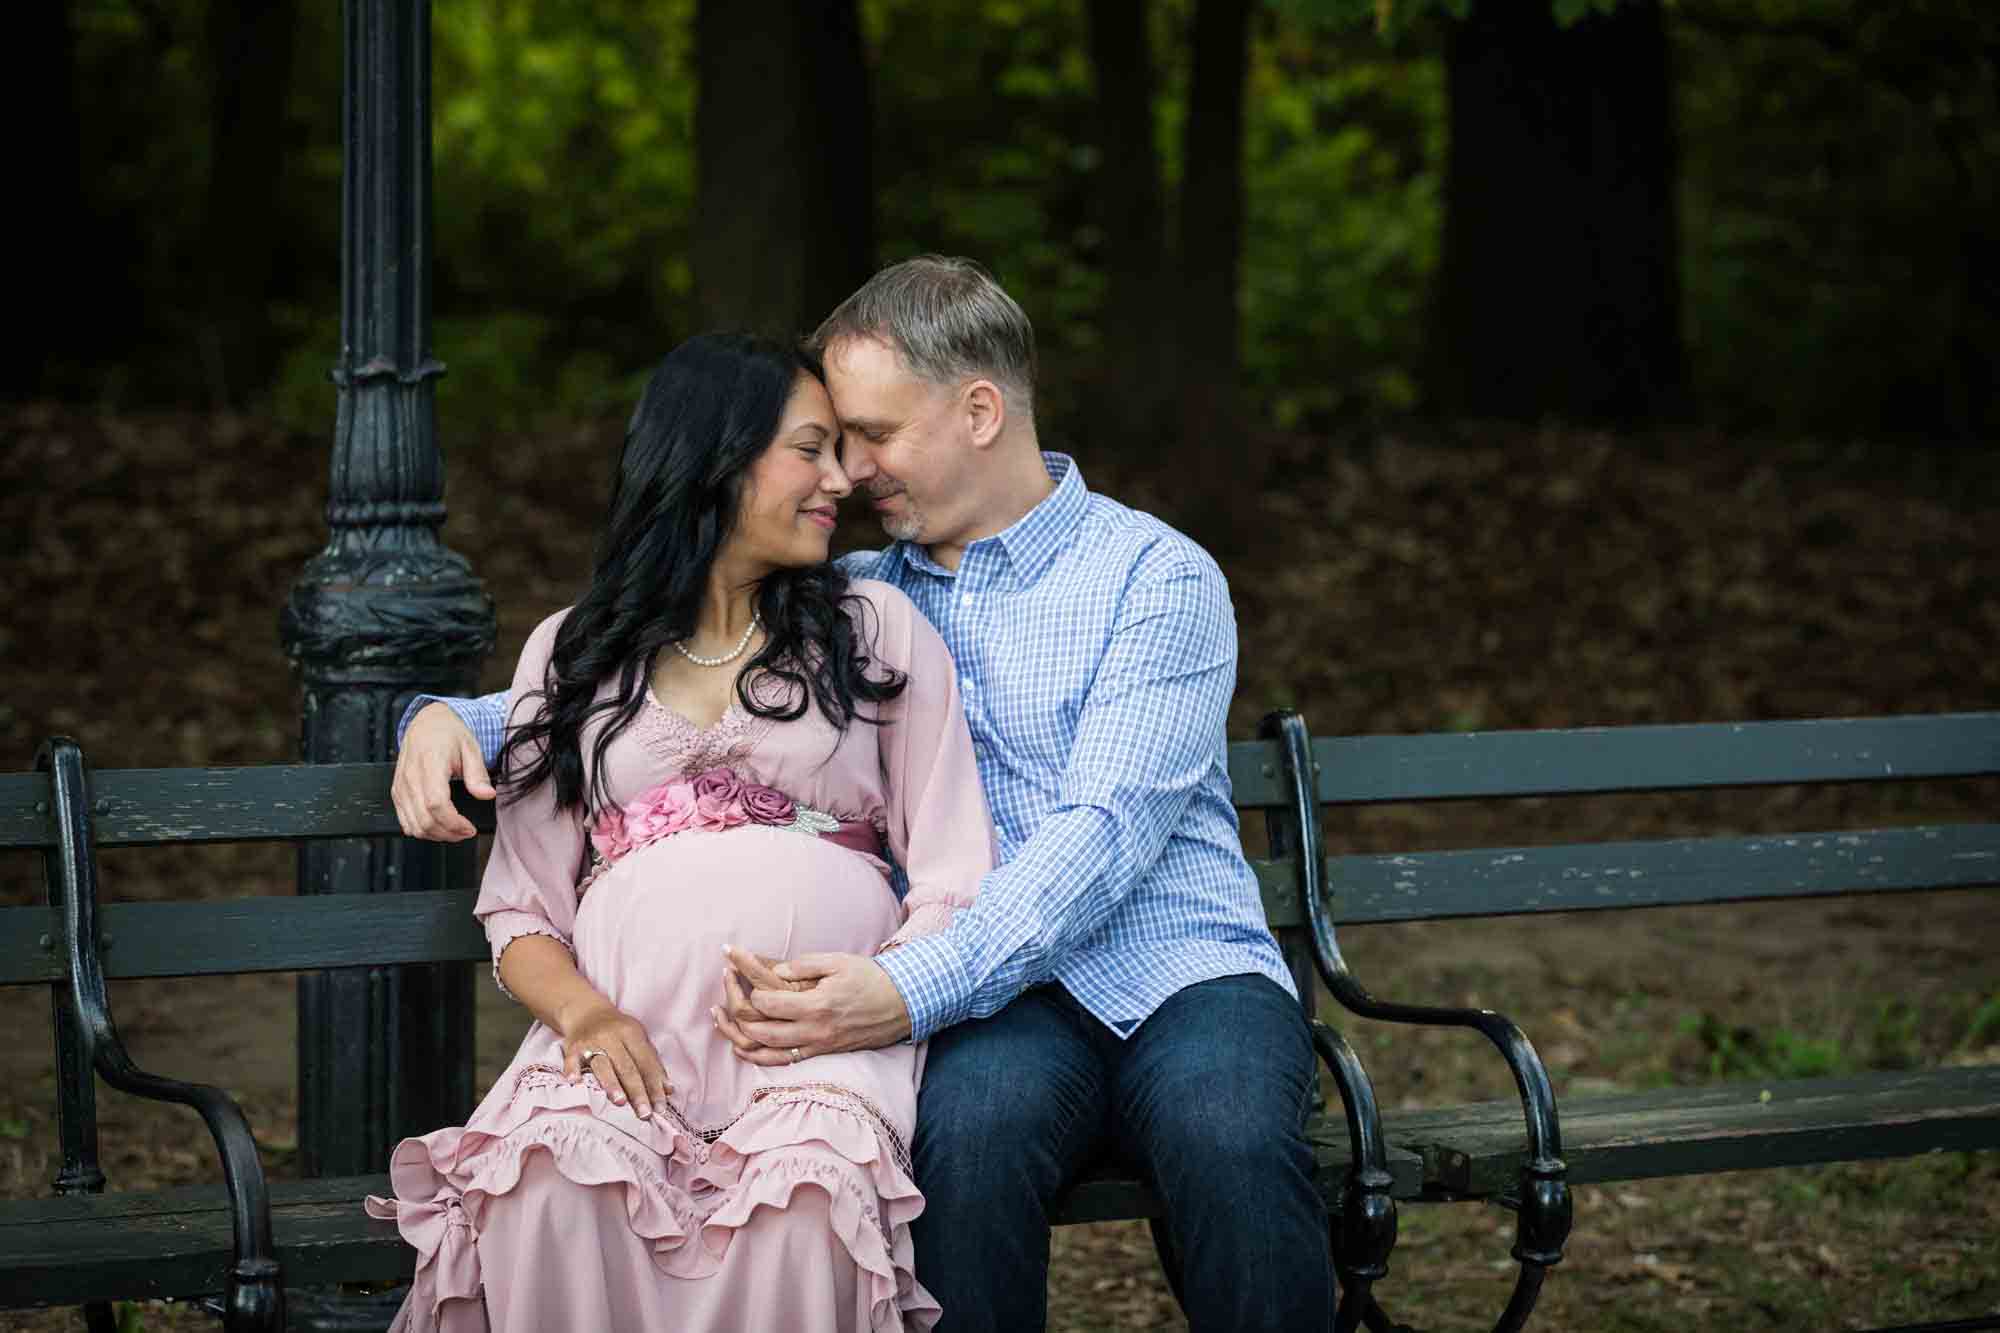 Forest Park maternity photos of couple sitting on a bench